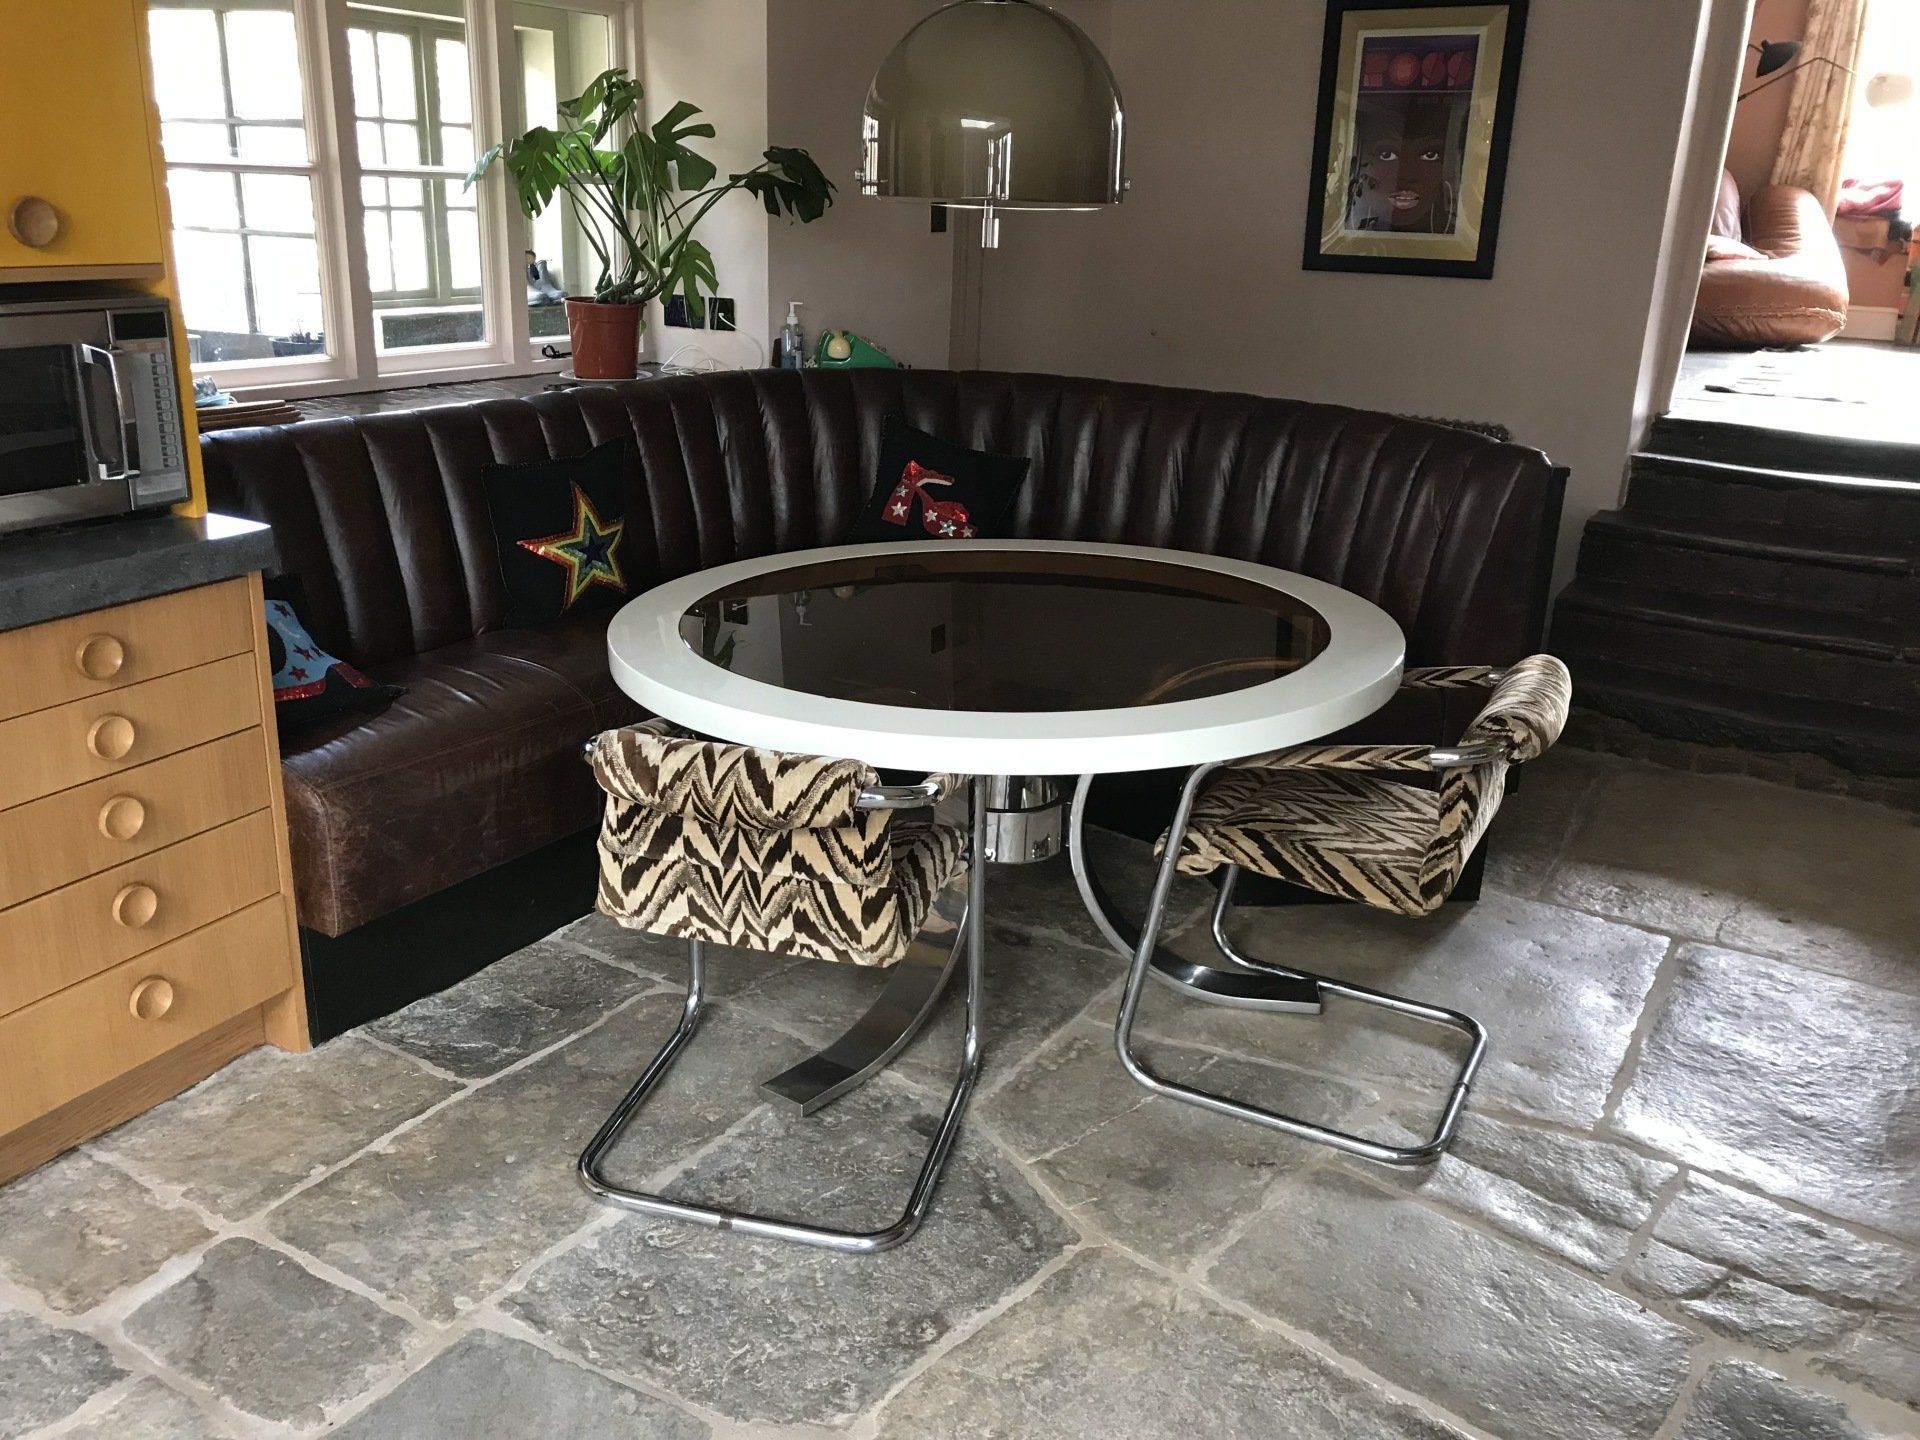 Banquette Seating leather with round table with flagstone floor and retro fabric chairs